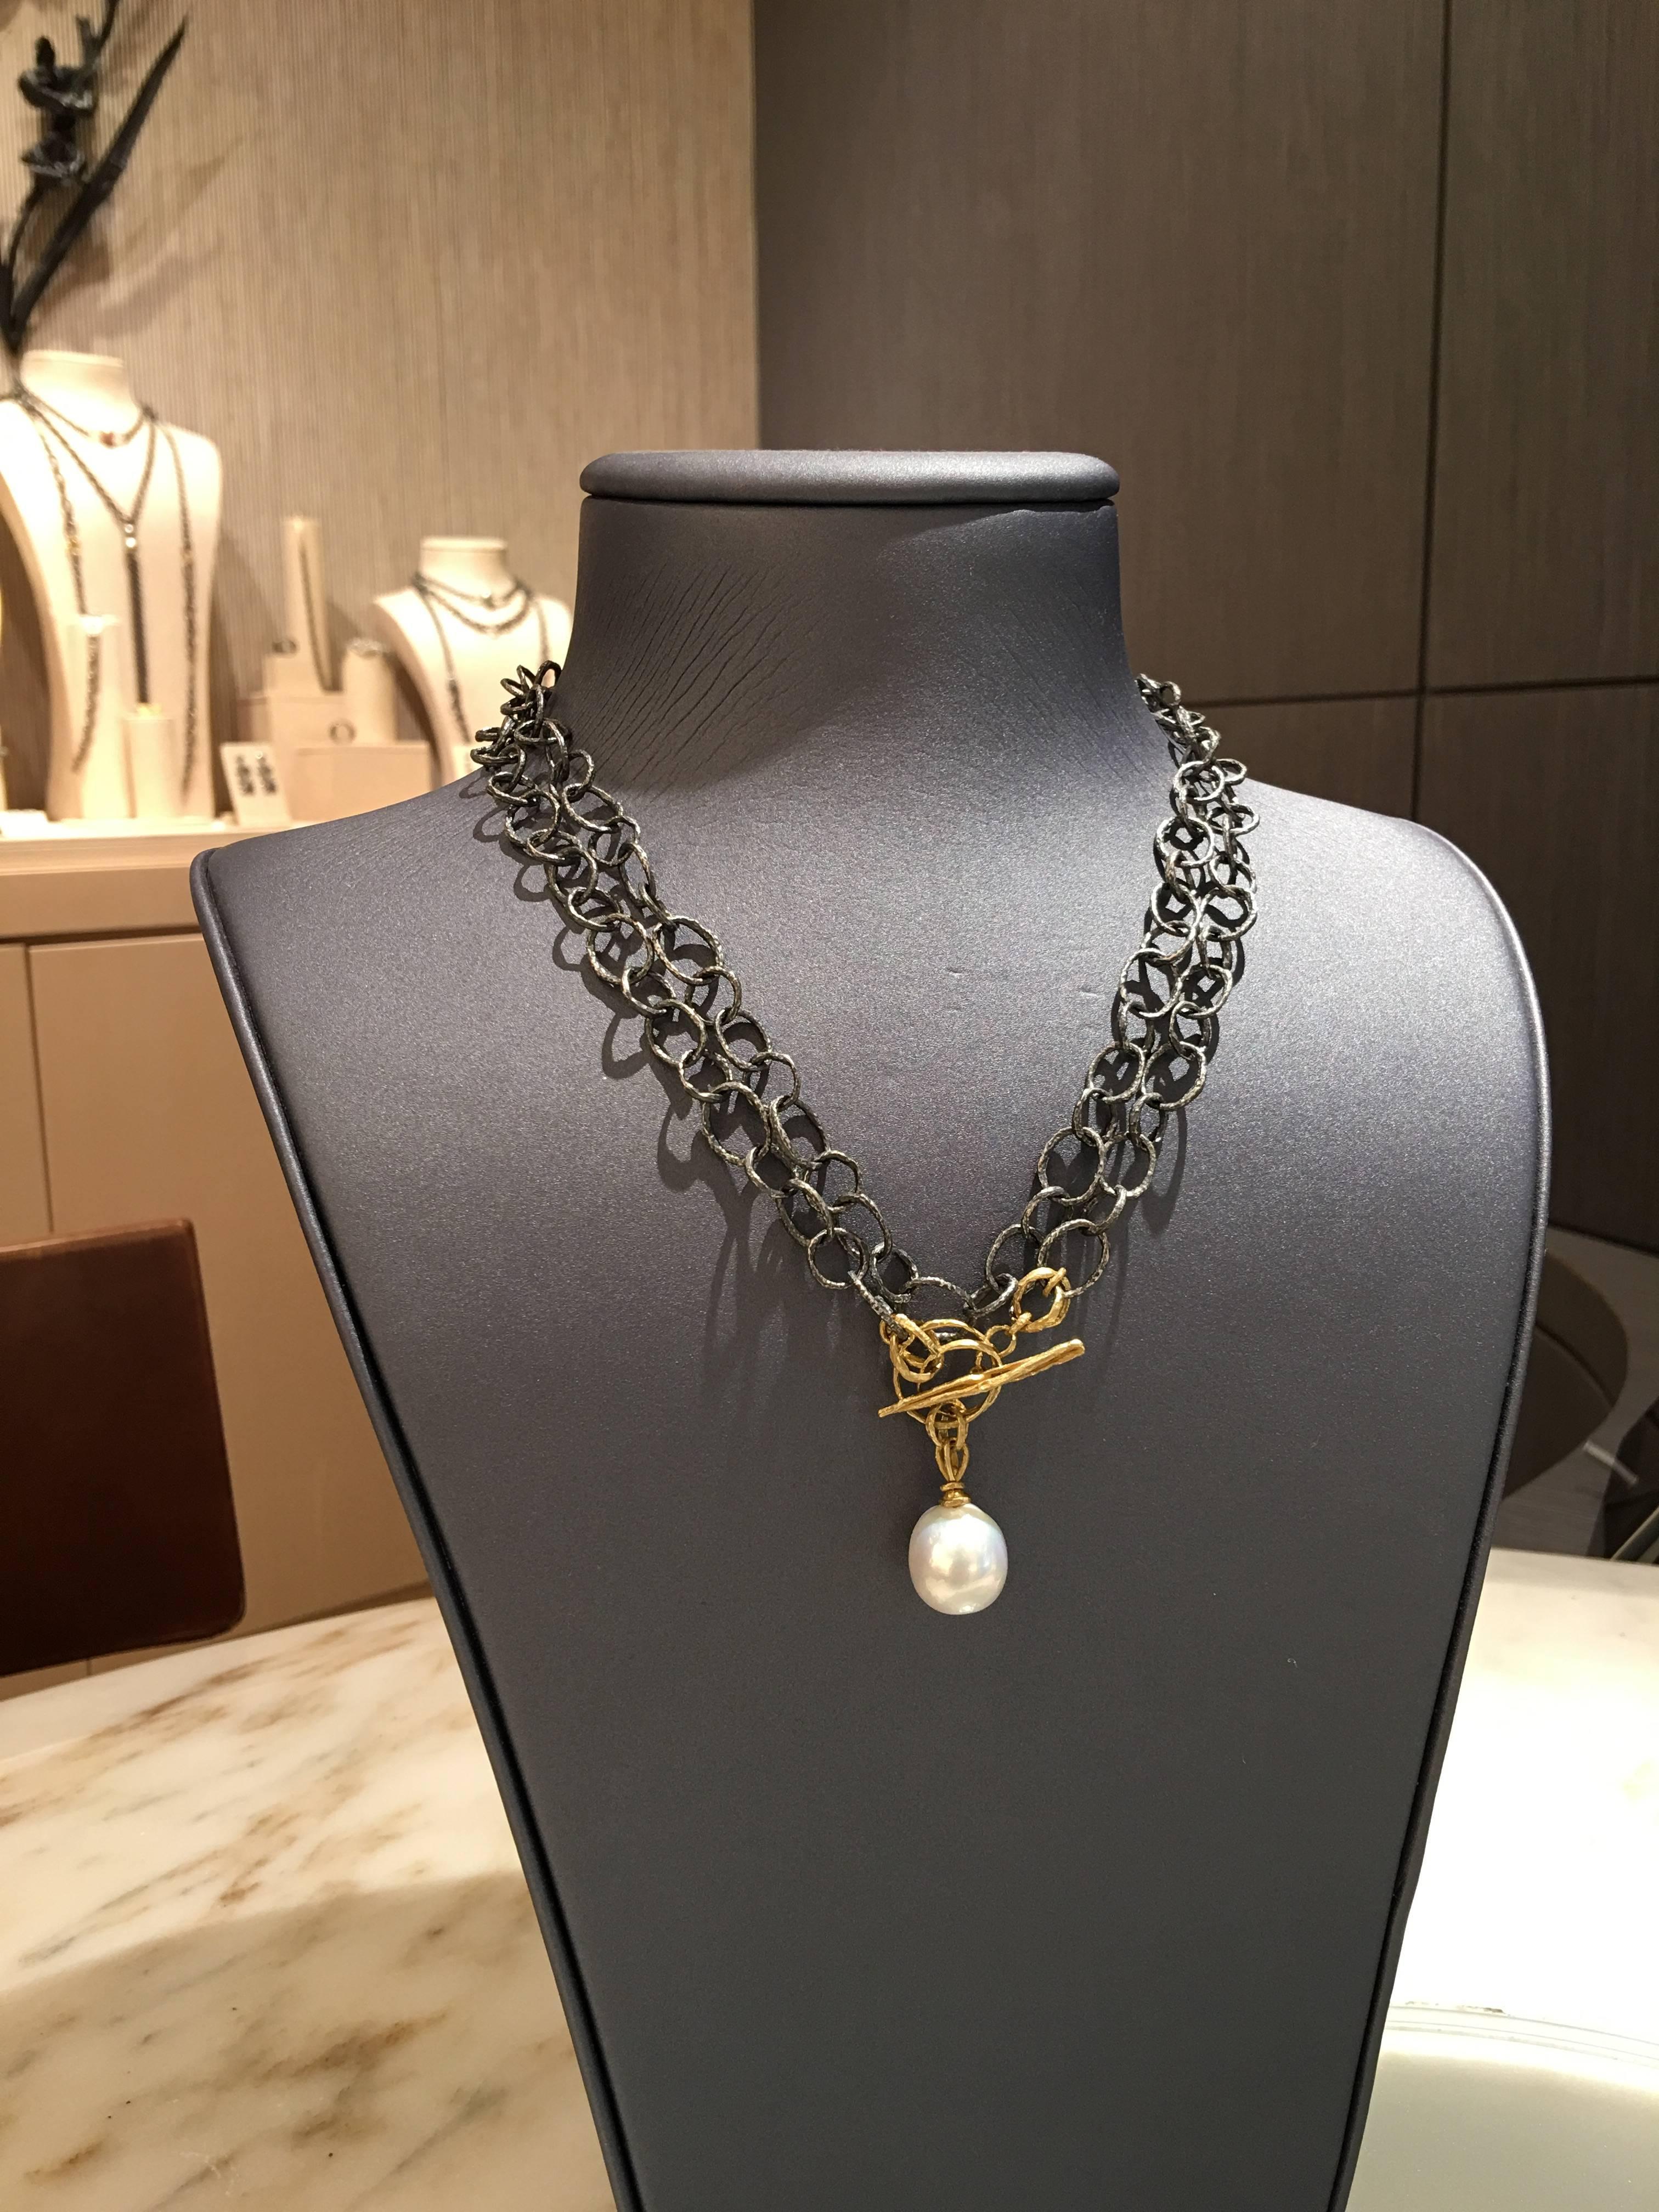 Oval Twig Chain Necklace and Lariat handcrafted by renowned and award winning jewelry artist John Iversen in oxidized sterling silver featuring a spectacular, lustrous South Sea pearl (15mm x 14mm) attached to an 18k yellow gold toggle clasp that